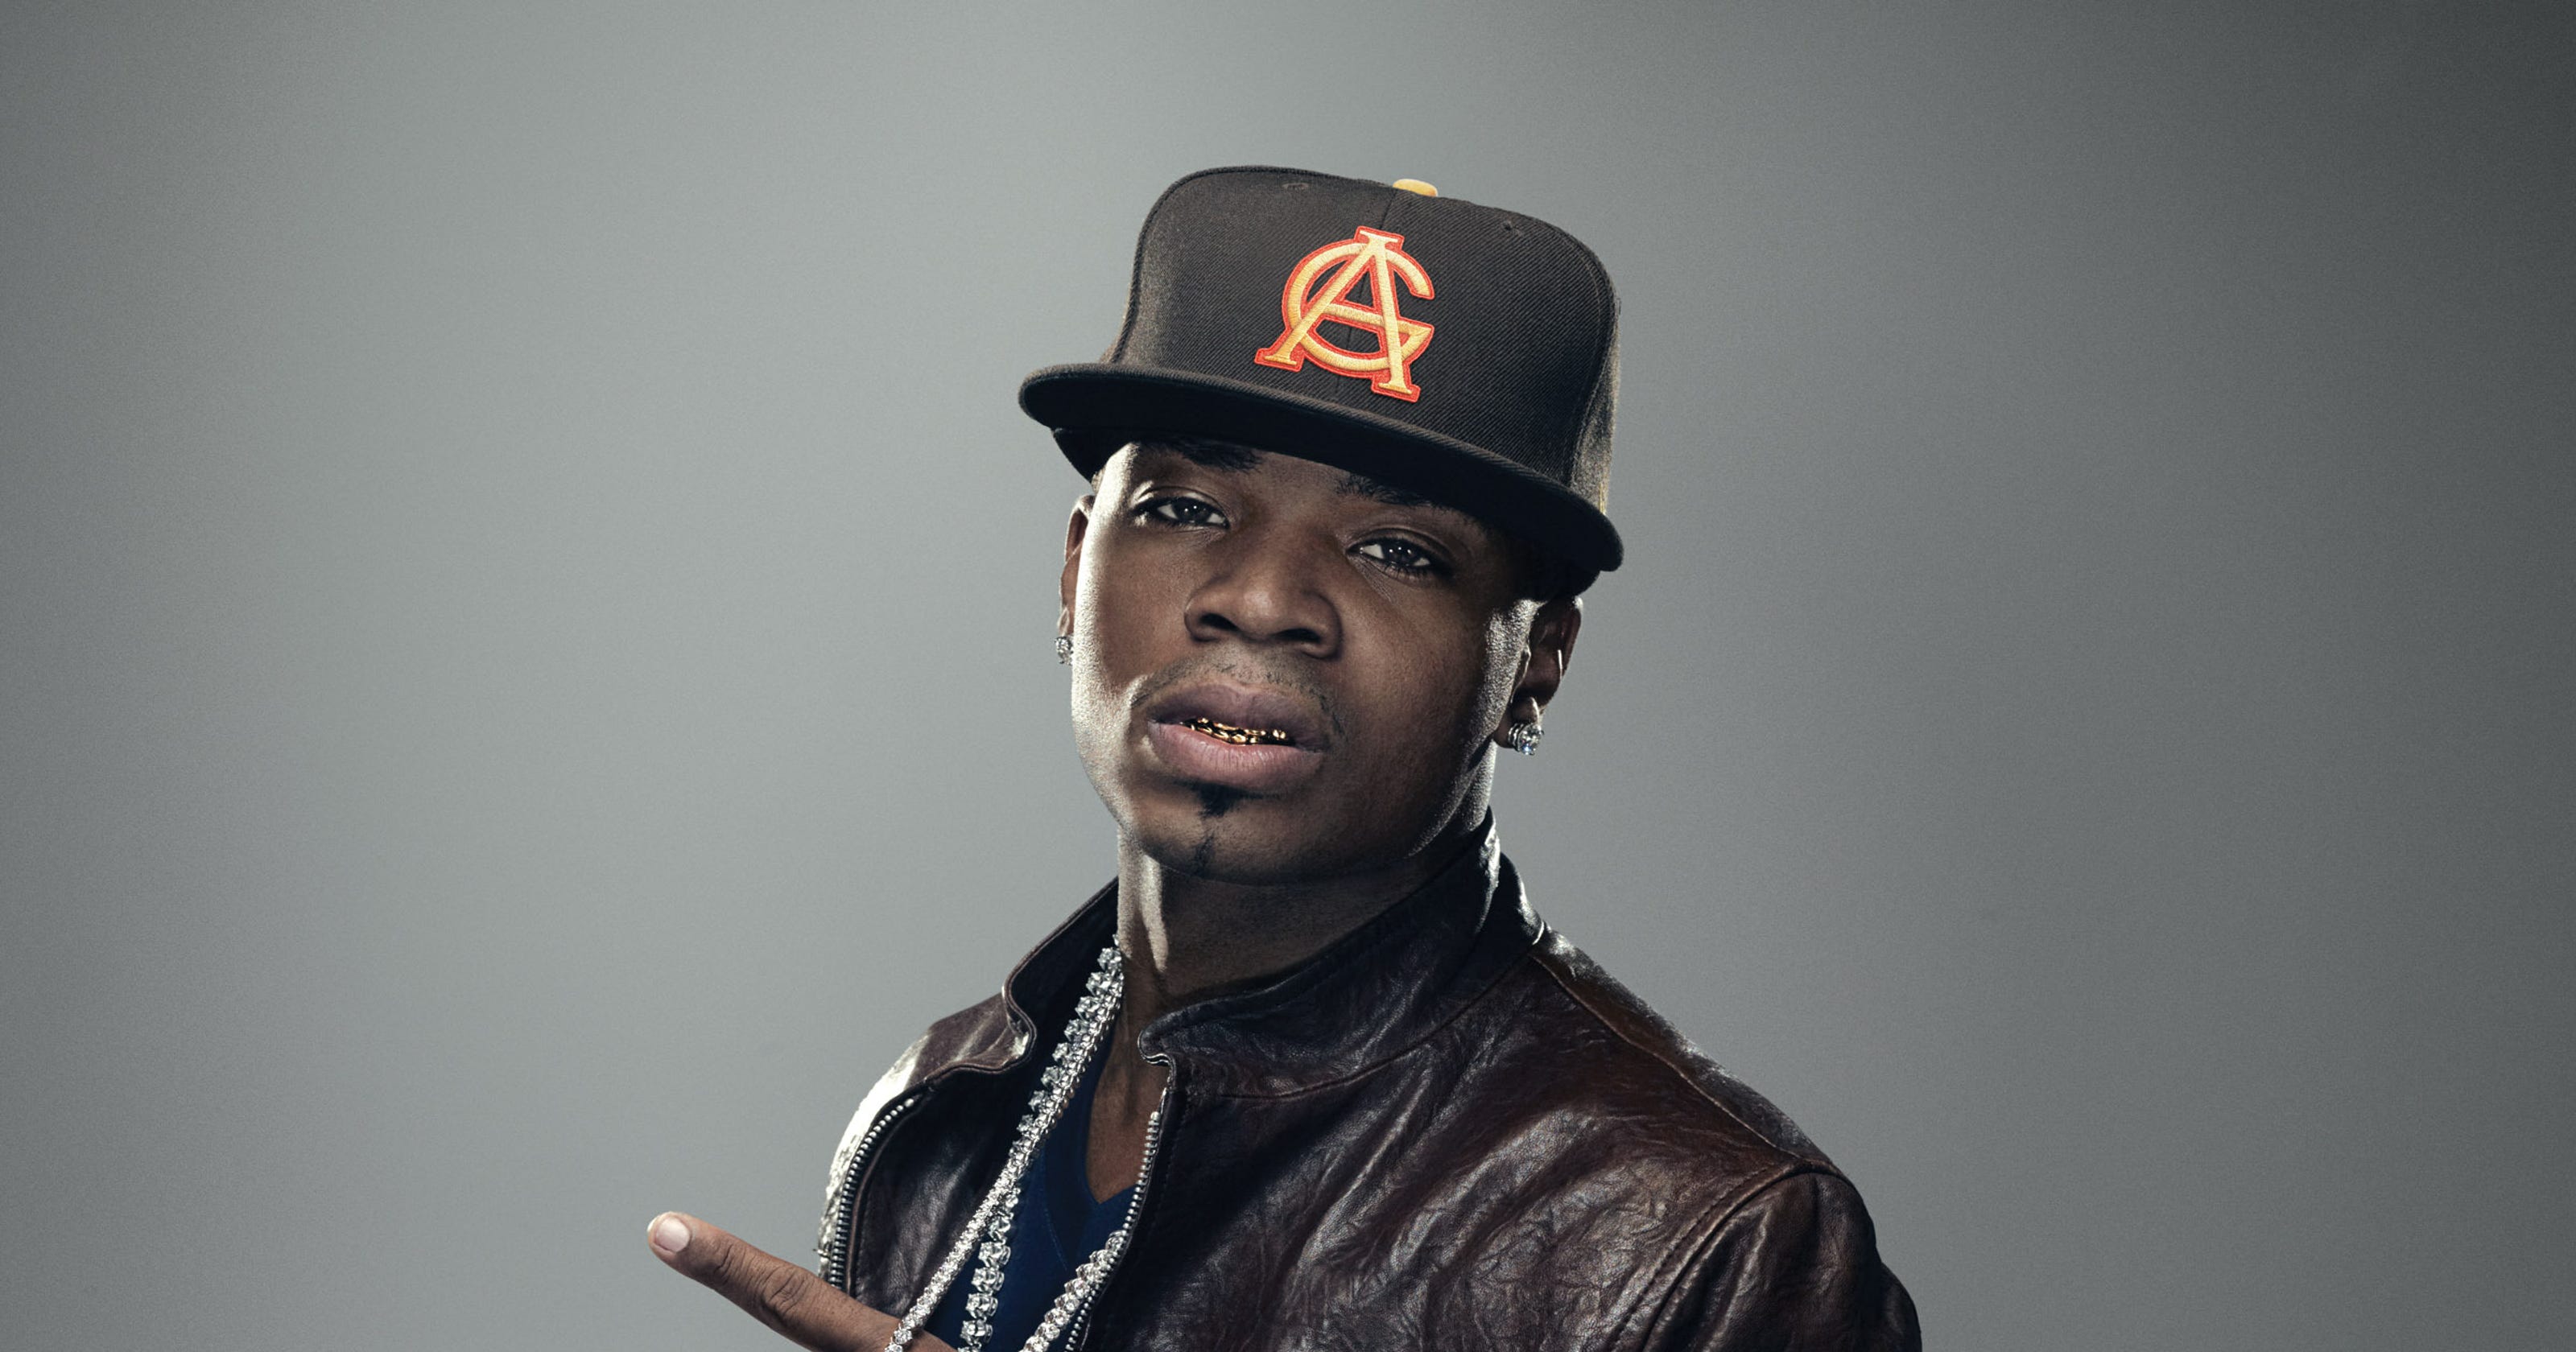 Rapper Plies to play Fort Myers, his hometown. Tickets on sale now.